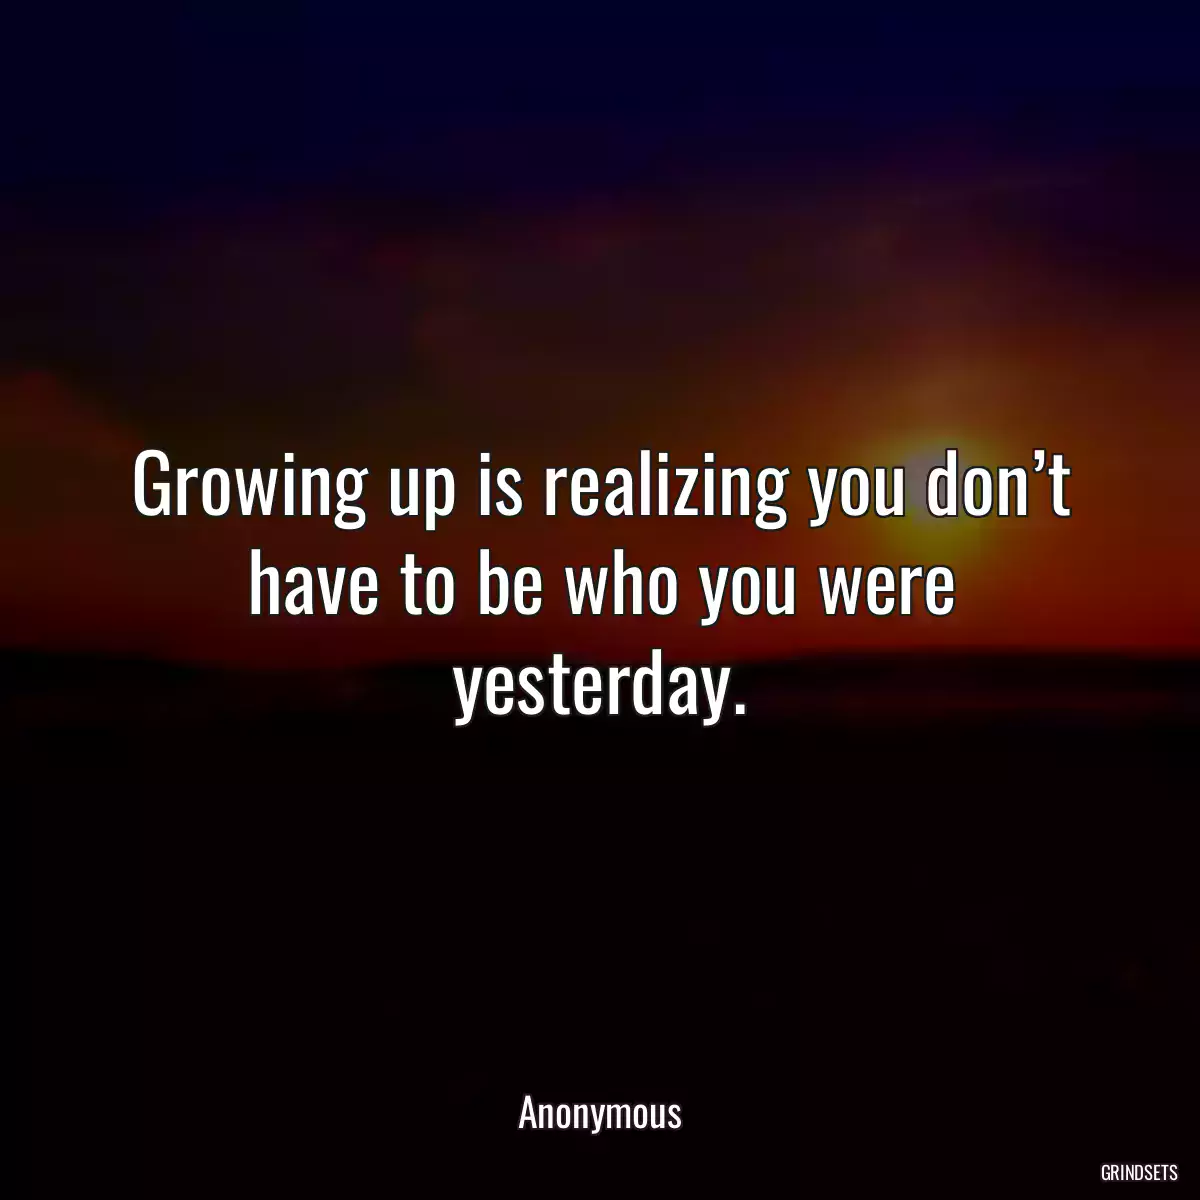 Growing up is realizing you don’t have to be who you were yesterday.